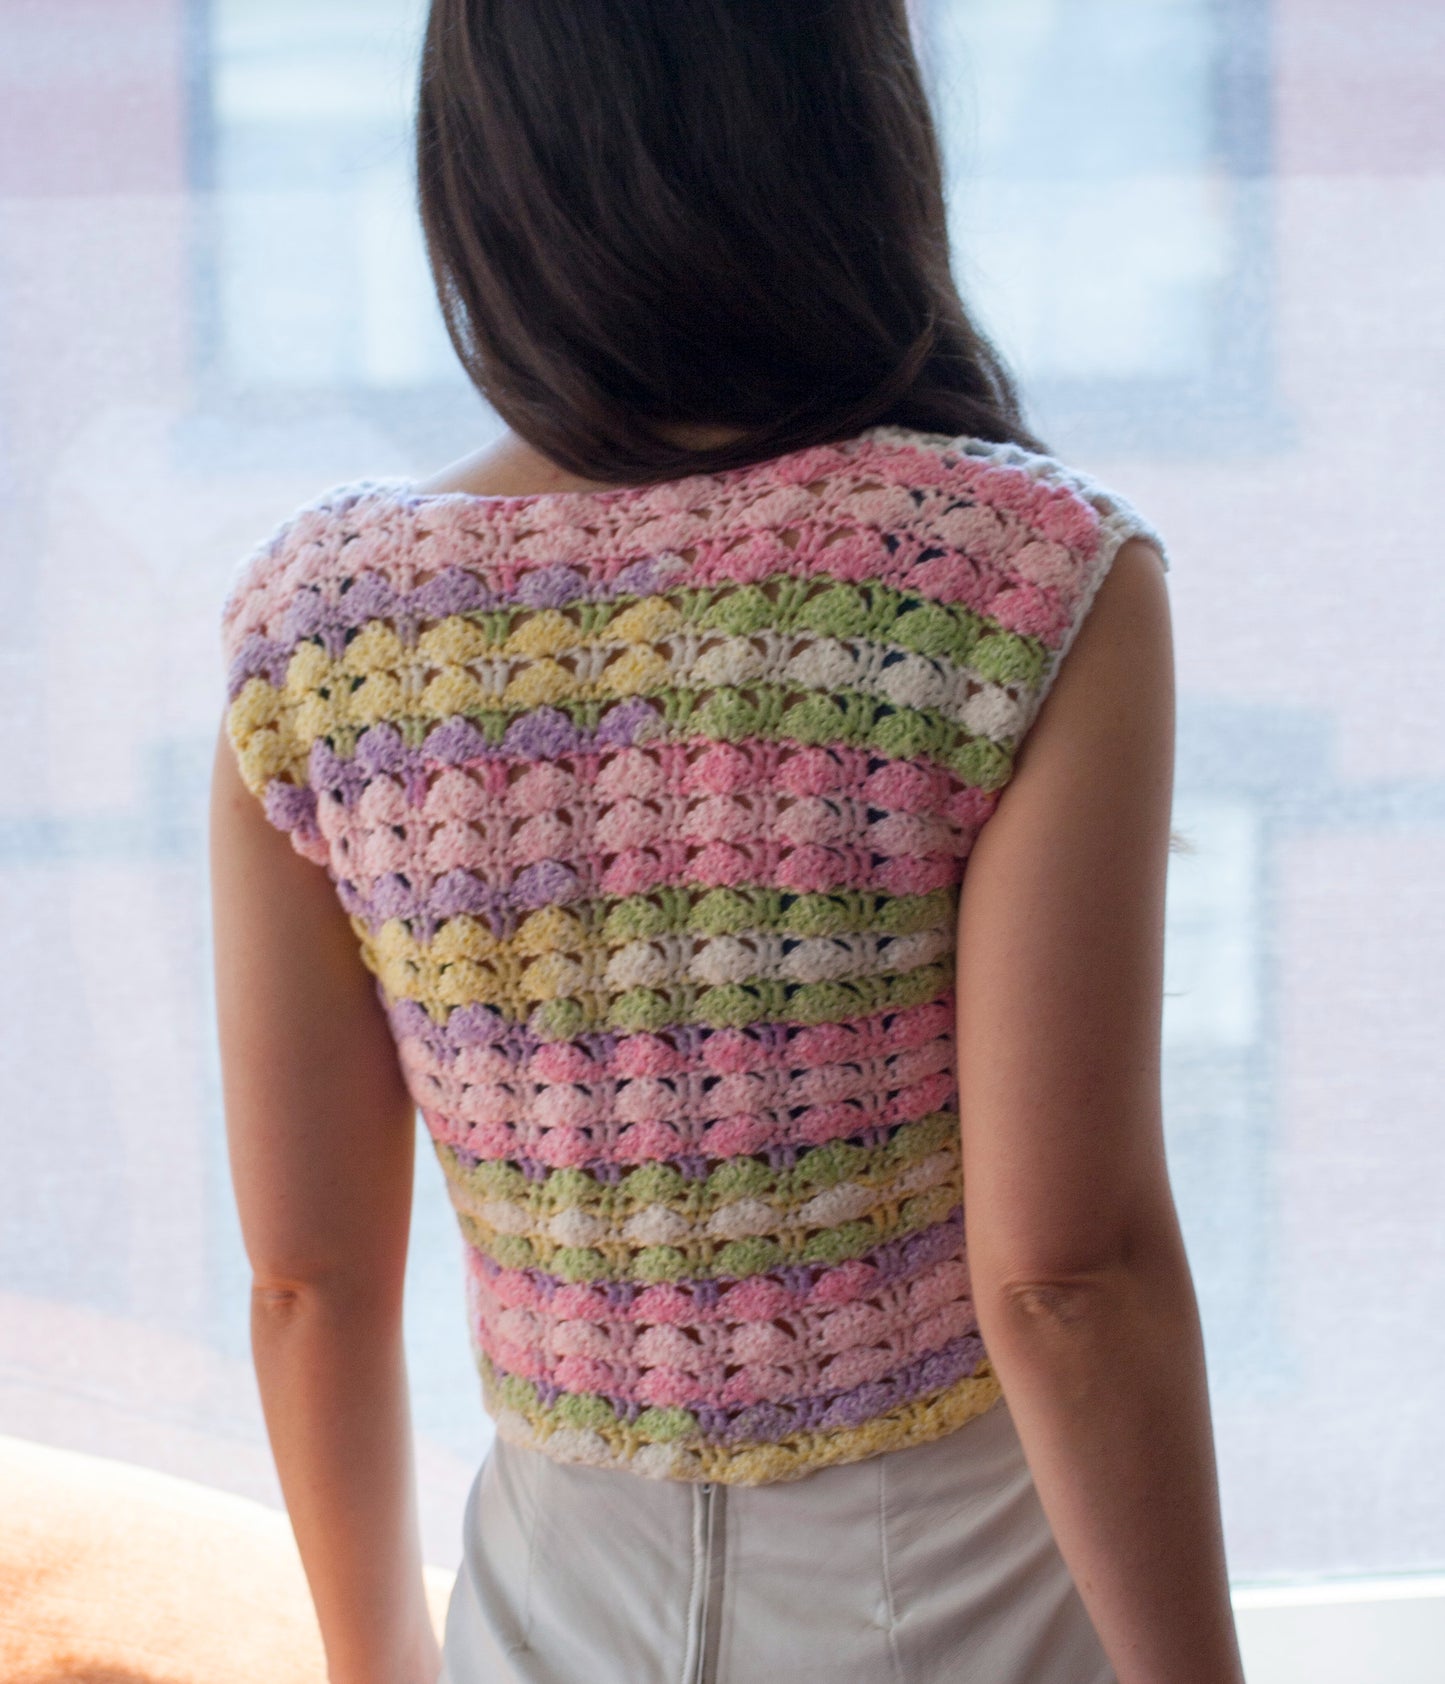 Back of the pastel rainbow mini top, as worn by the model